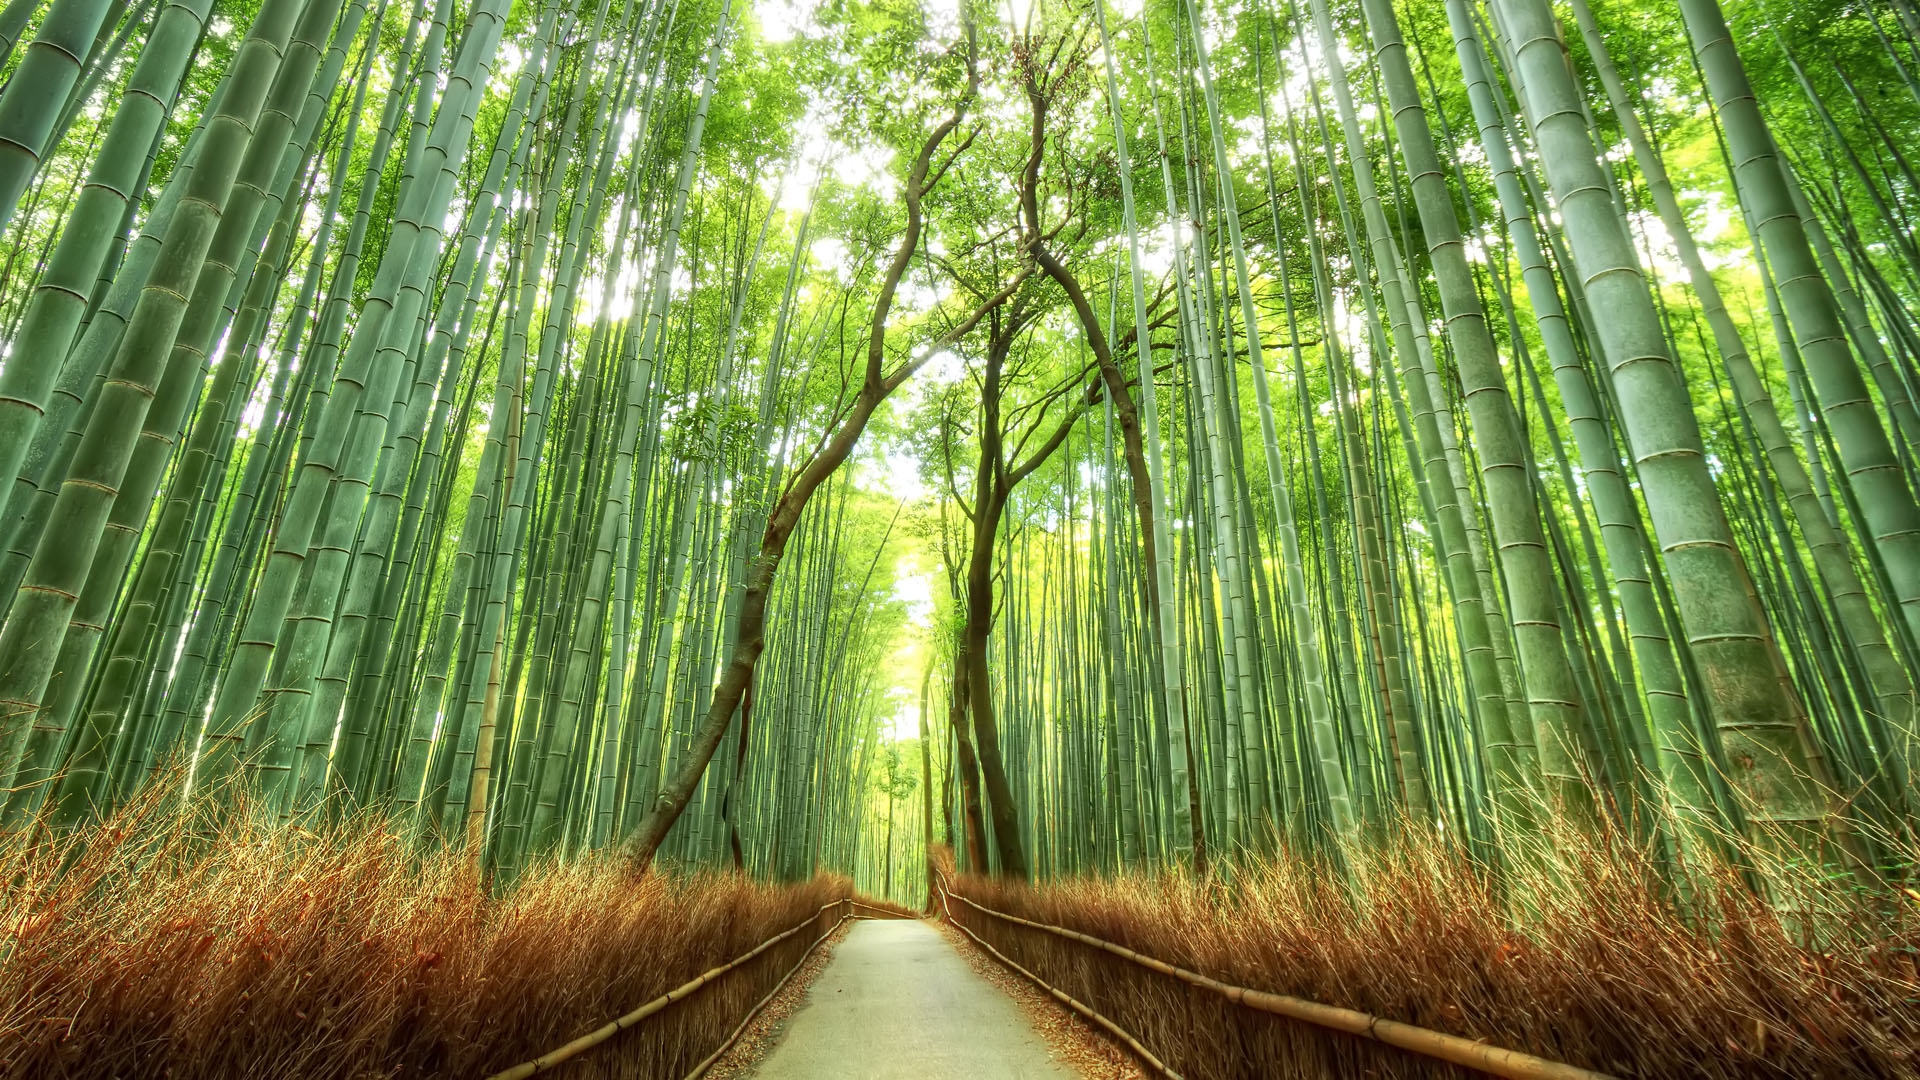 Wallpaper ID: 546917 / hutan bambu, bamboo tree, forest path, plant, 4K,  bamboo grove, beauty in nature, growth, green color, bamboo forest, tree,  path, woodland, bamboo - plant free download